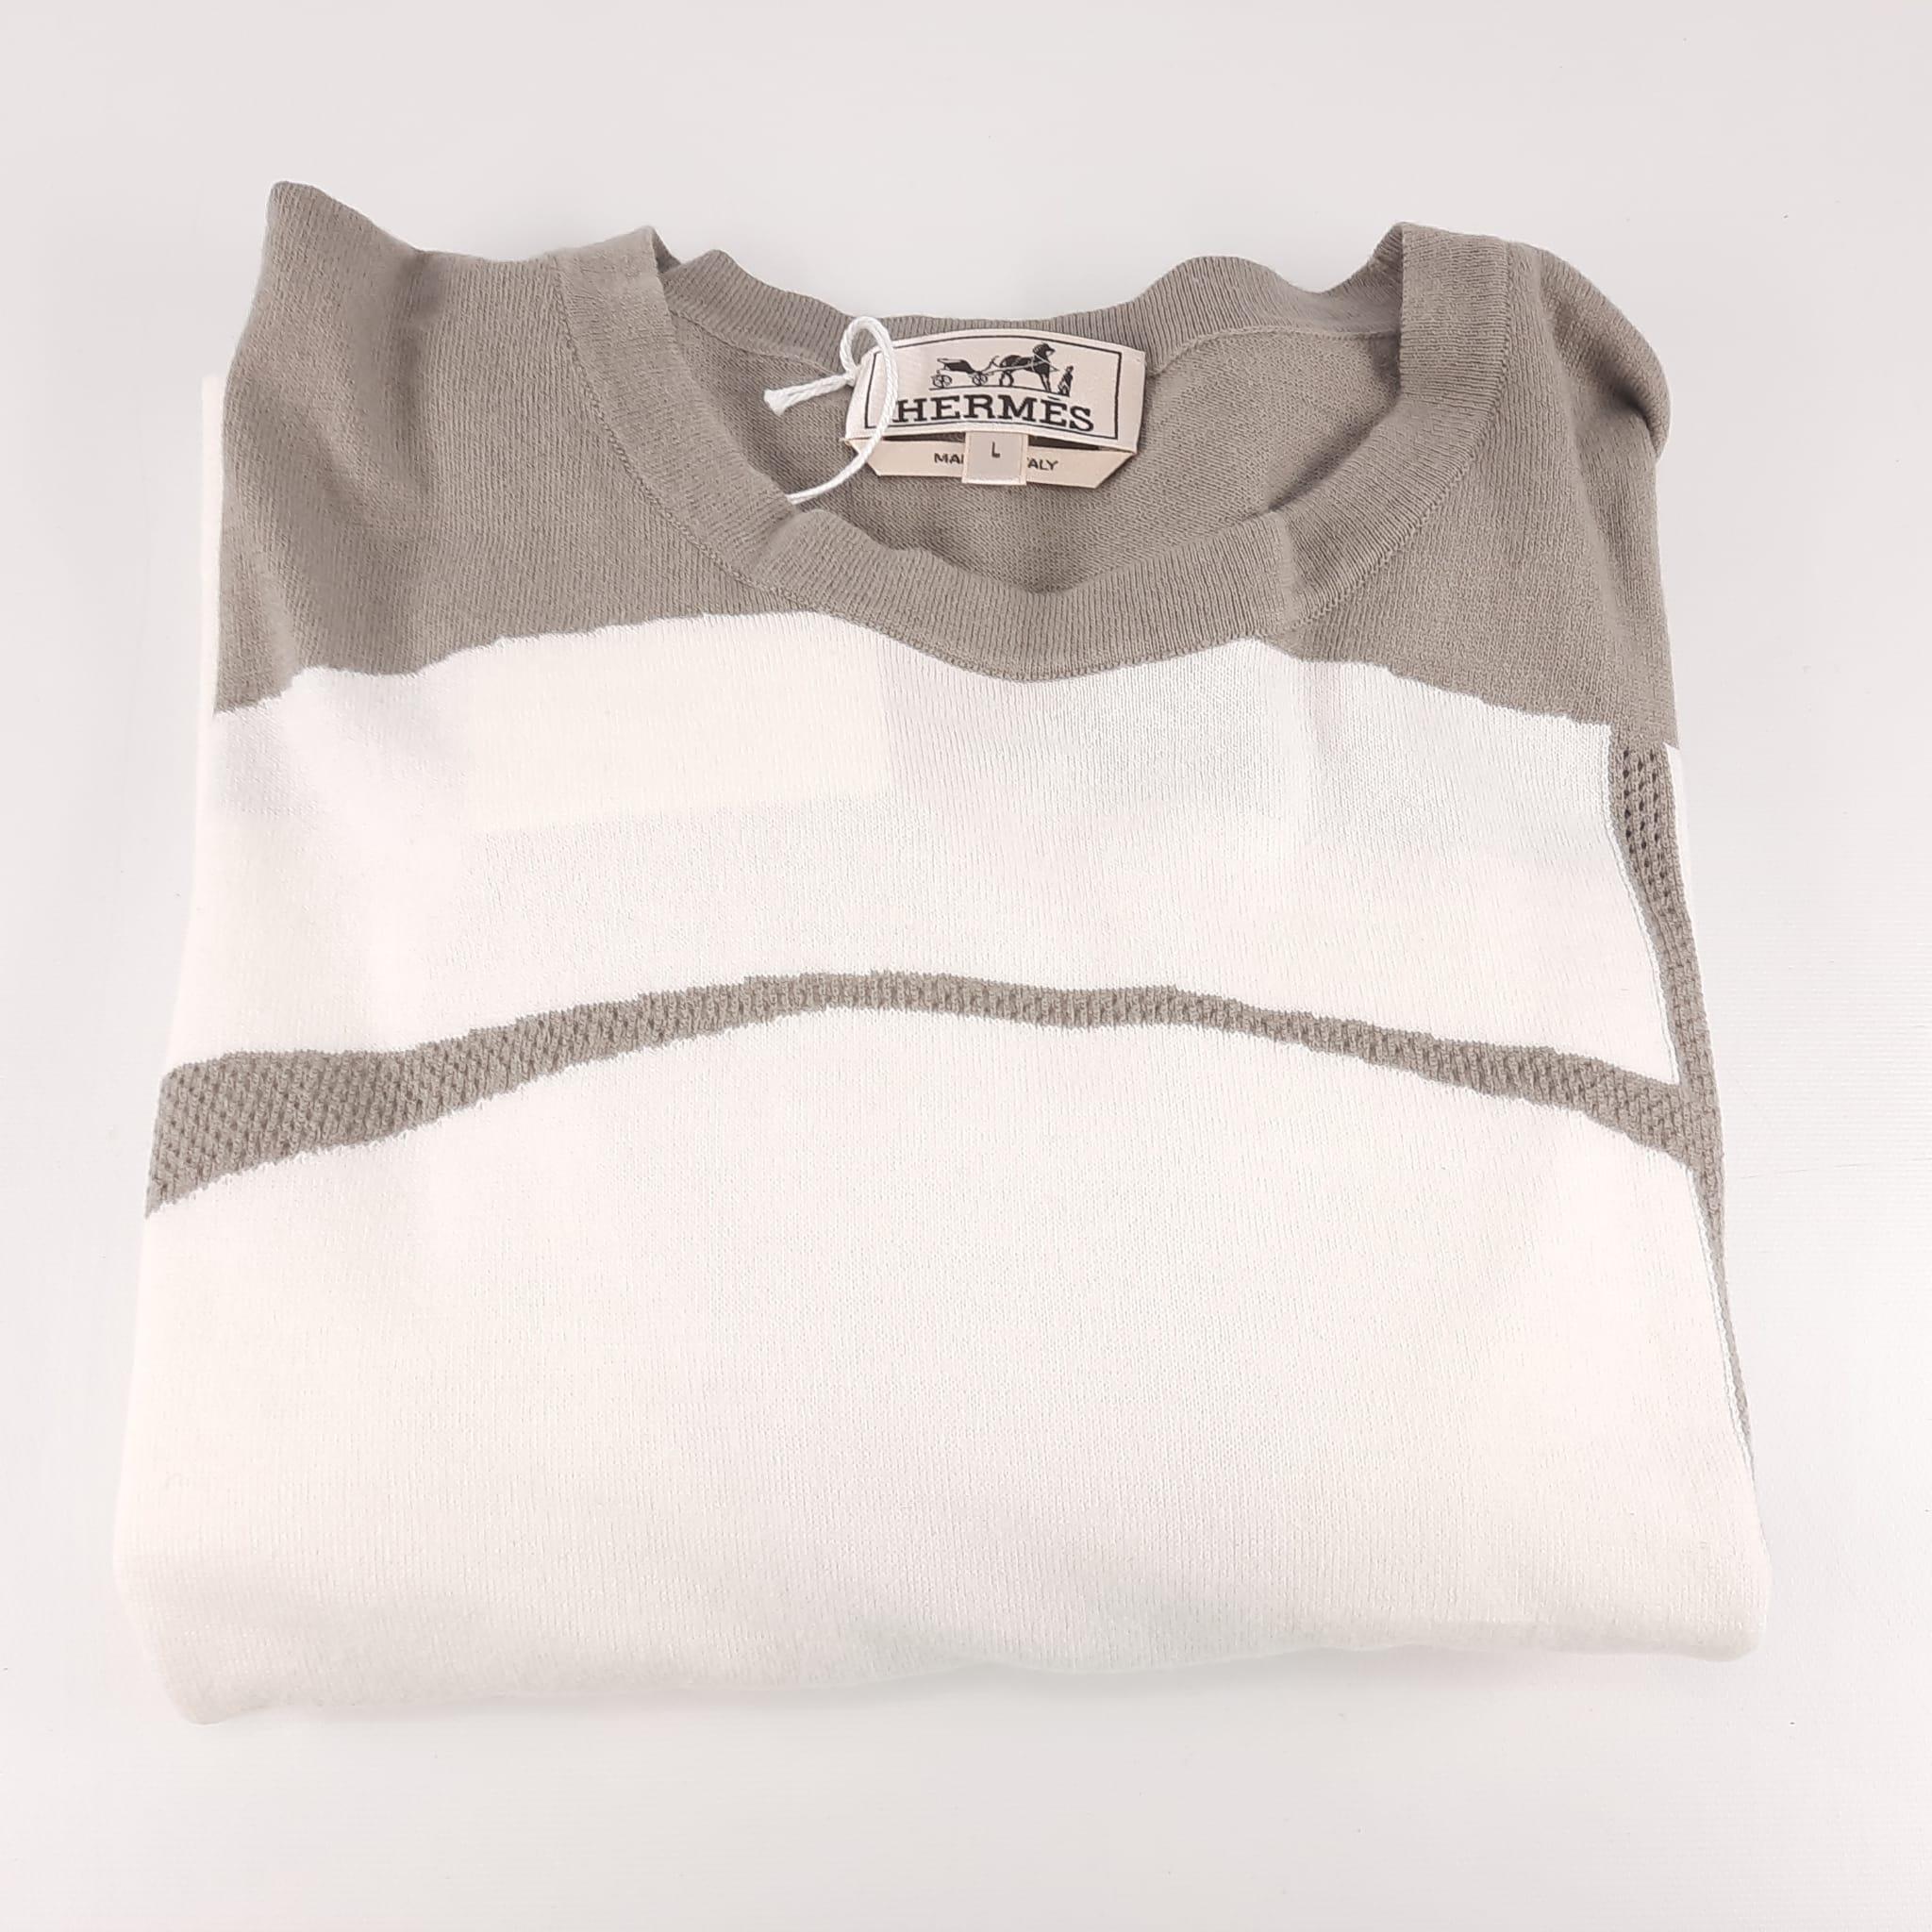 Size L
Short-sleeve crewneck t-shirt in cotton, cashmere and 